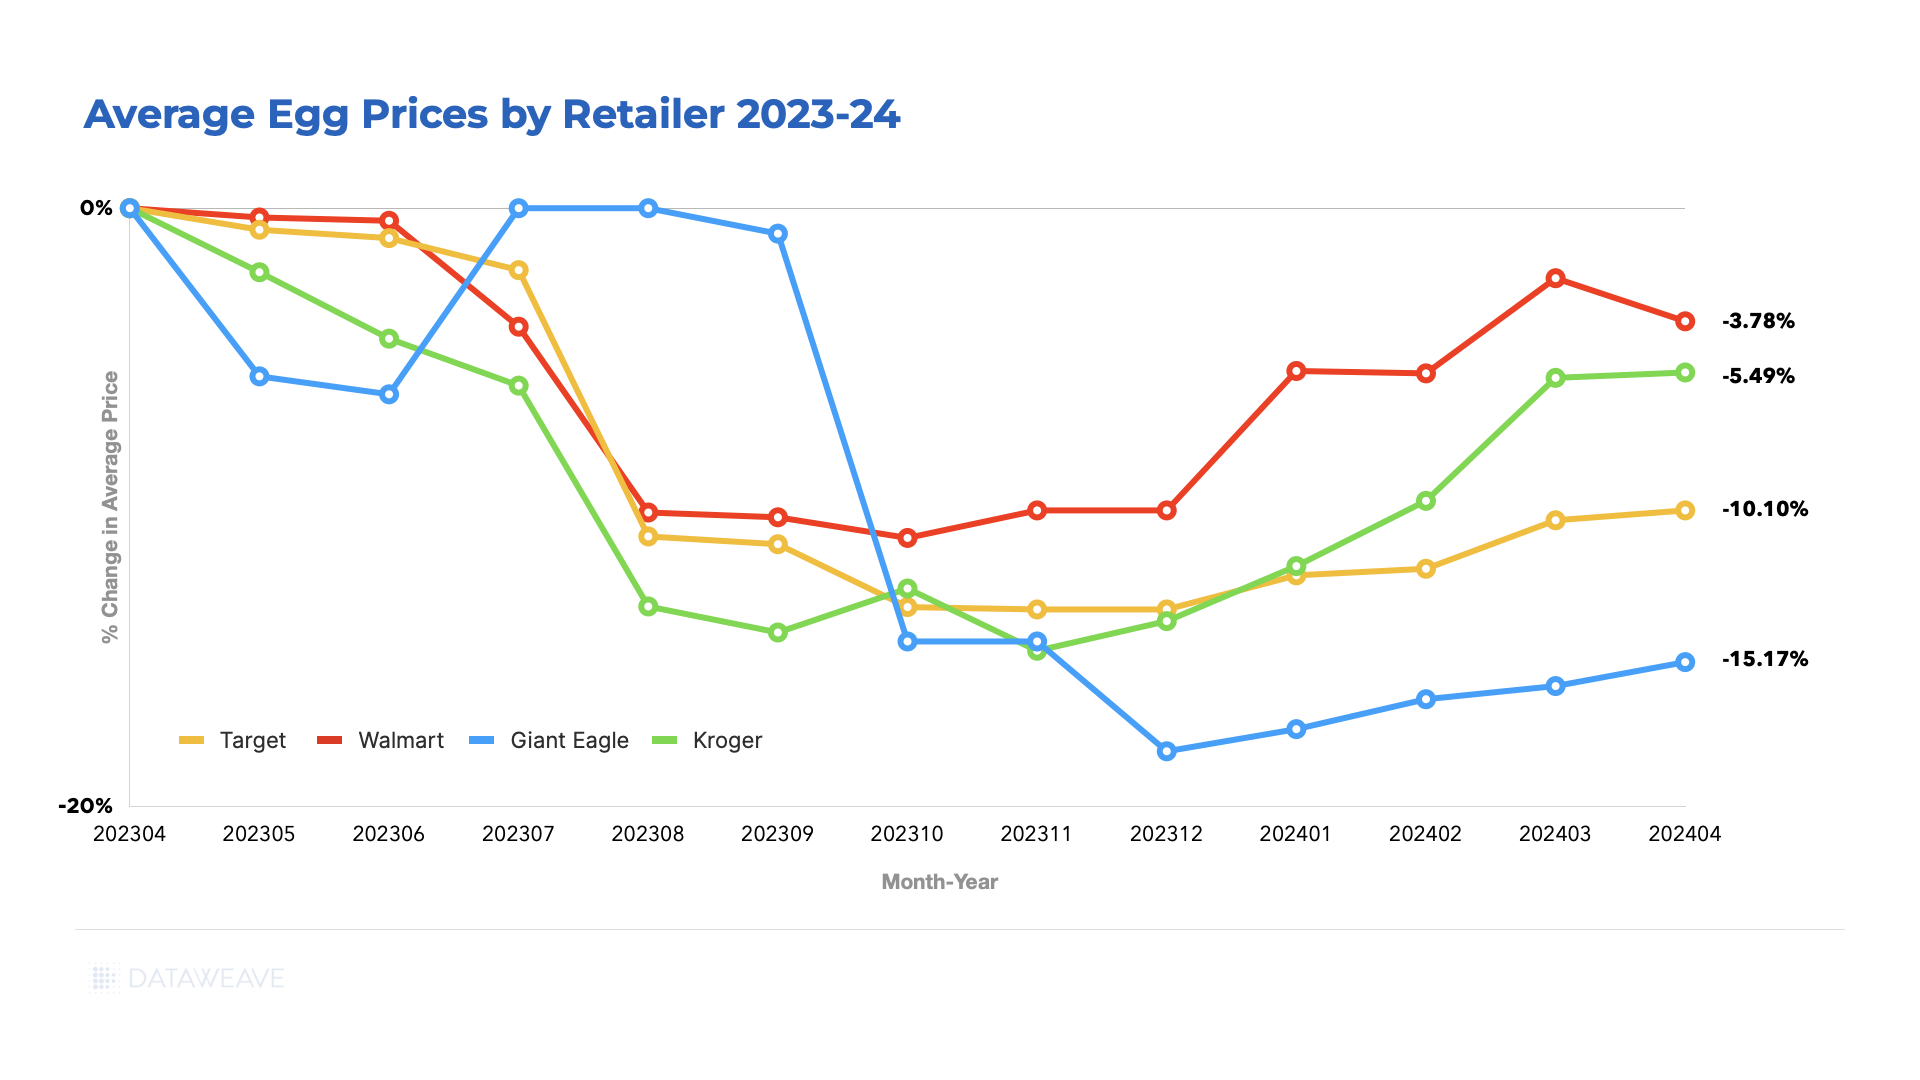 Egg Price Chart Featuring Leading Retailers 2023-2024